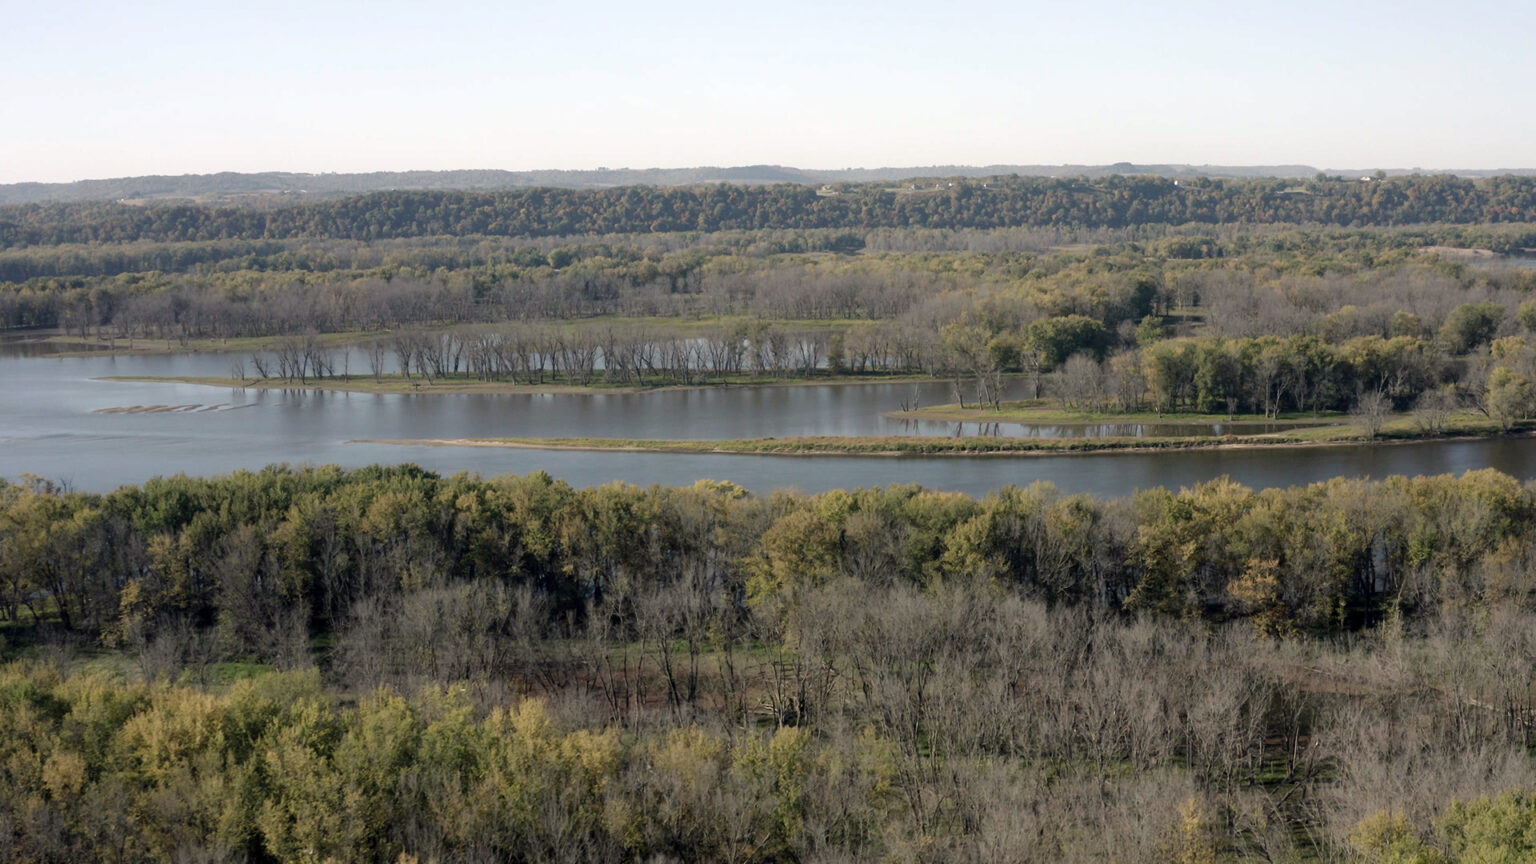 An aerial photo shows trees with mostly green and some yellow leaves, along with many with no leaves, on land located alongside and among different channels of a river, with tree covered bluffs on the opposite shore under a clear sky.